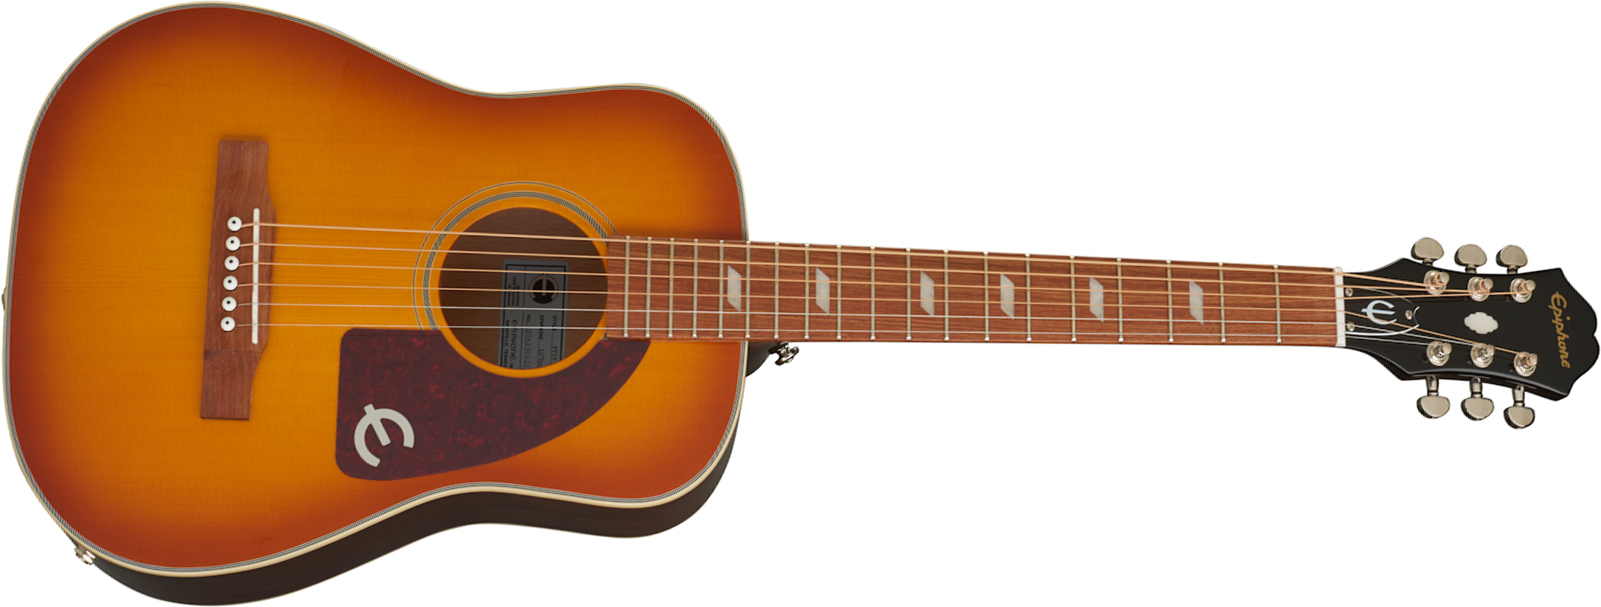 Epiphone Lil Tex Travel Outfit Epicea Sapele Gra +housse - Faded Cherry - Travel acoustic guitar - Main picture